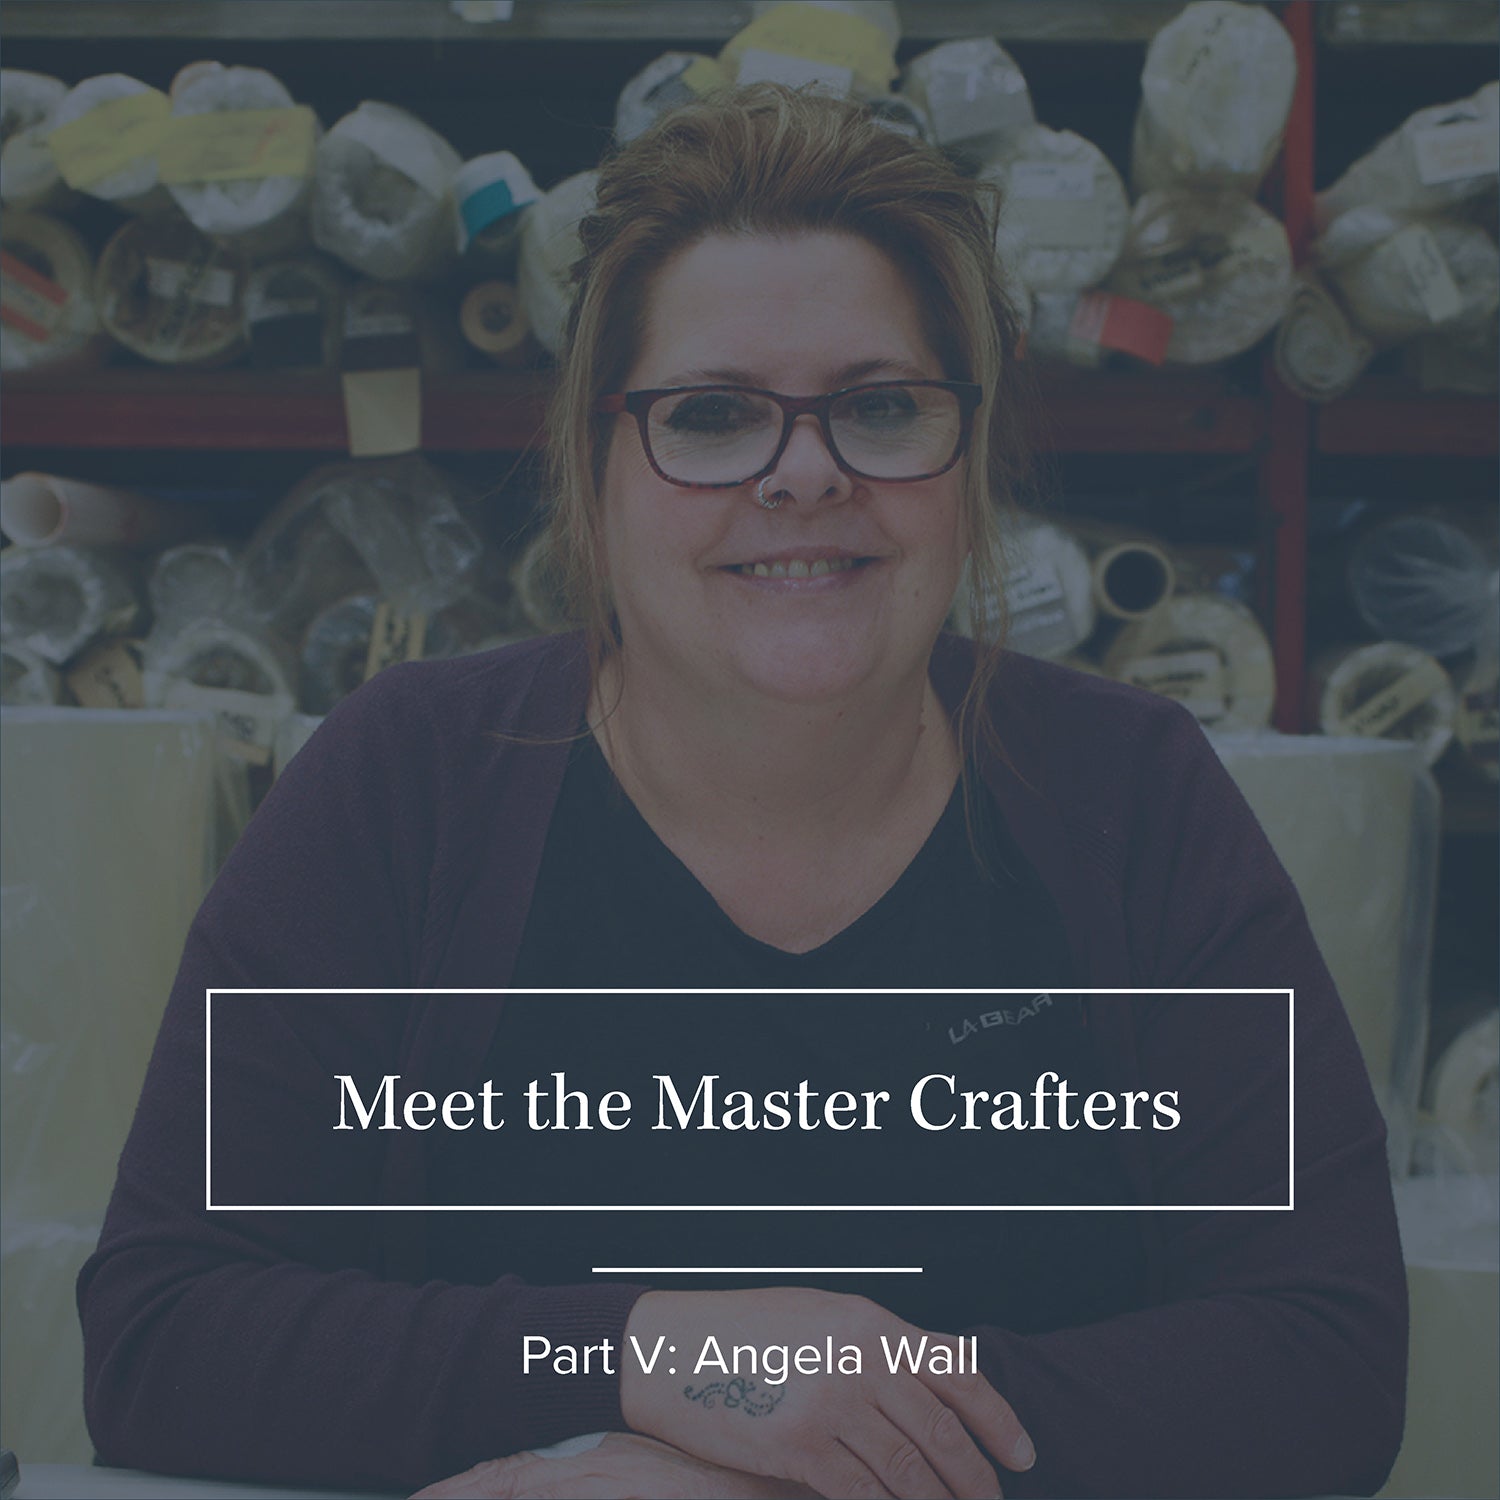 Meet the Master Crafters: Part V